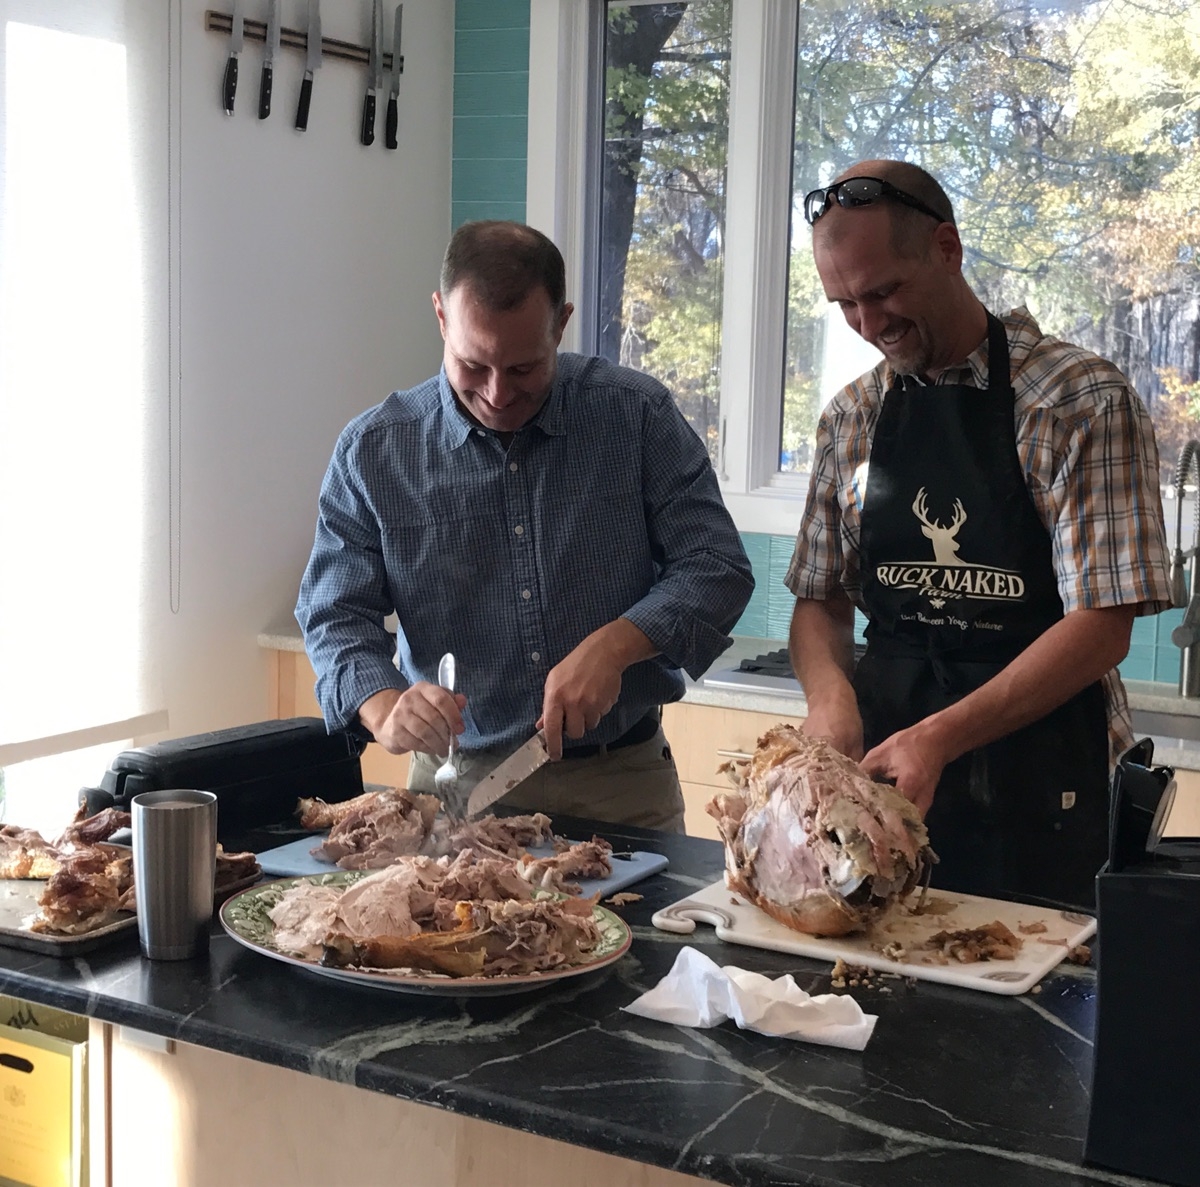 Carving the Thanksgiving turkey with David Spohn